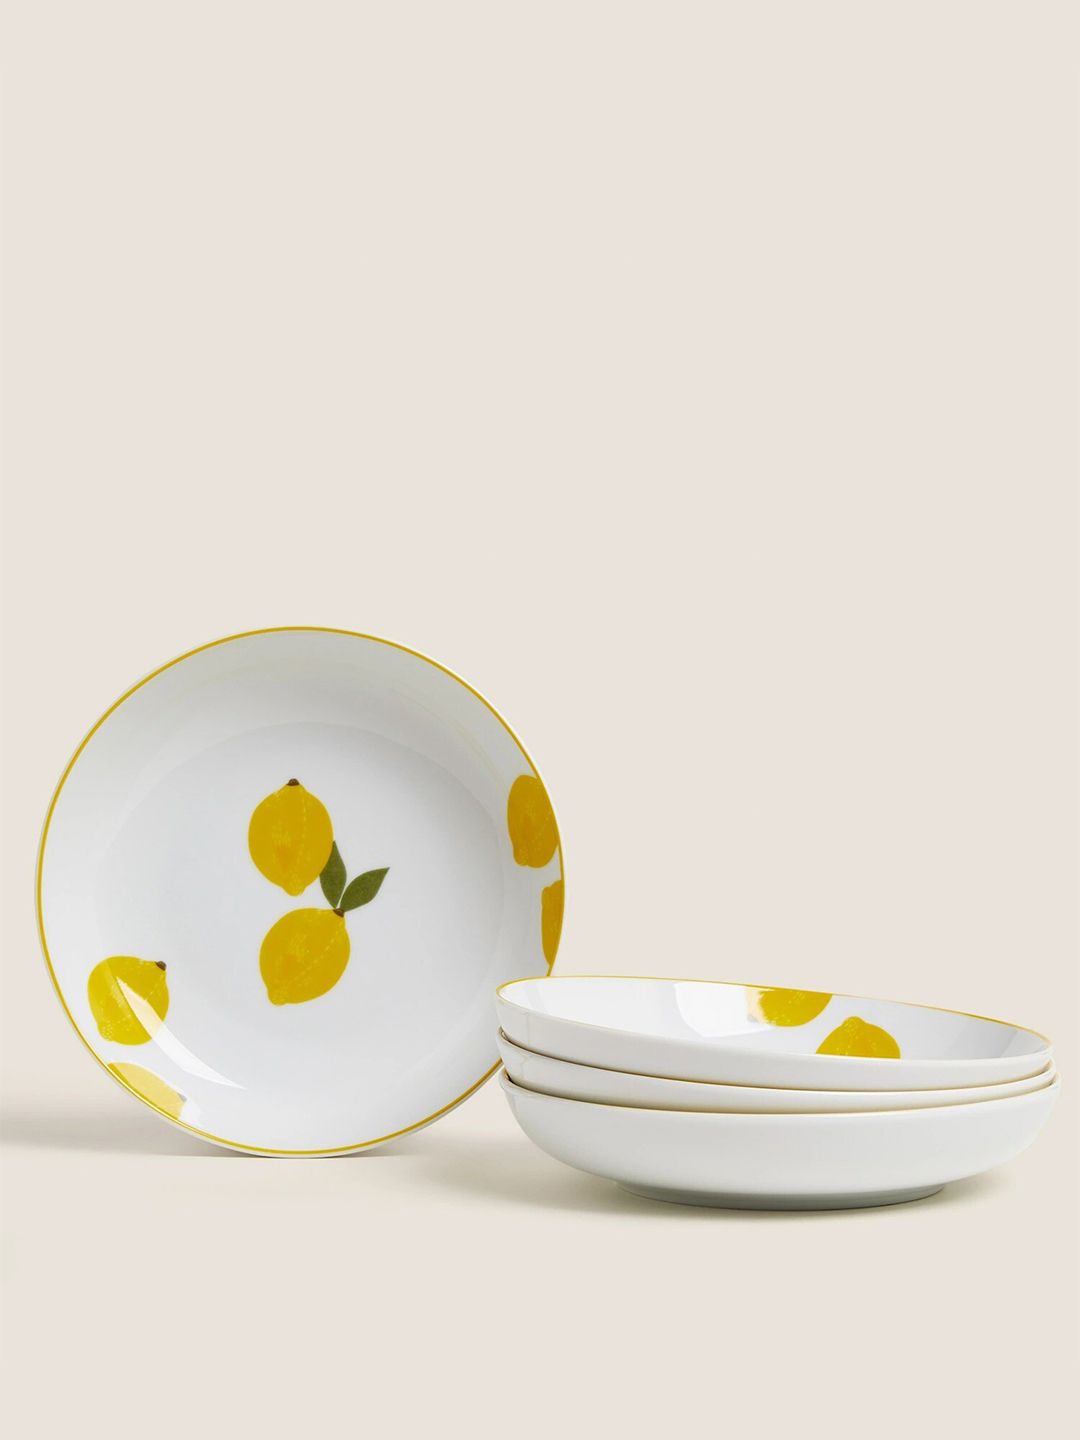 Marks & Spencer White & Yellow 4 Pieces Printed Porcelain Glossy Plates Price in India